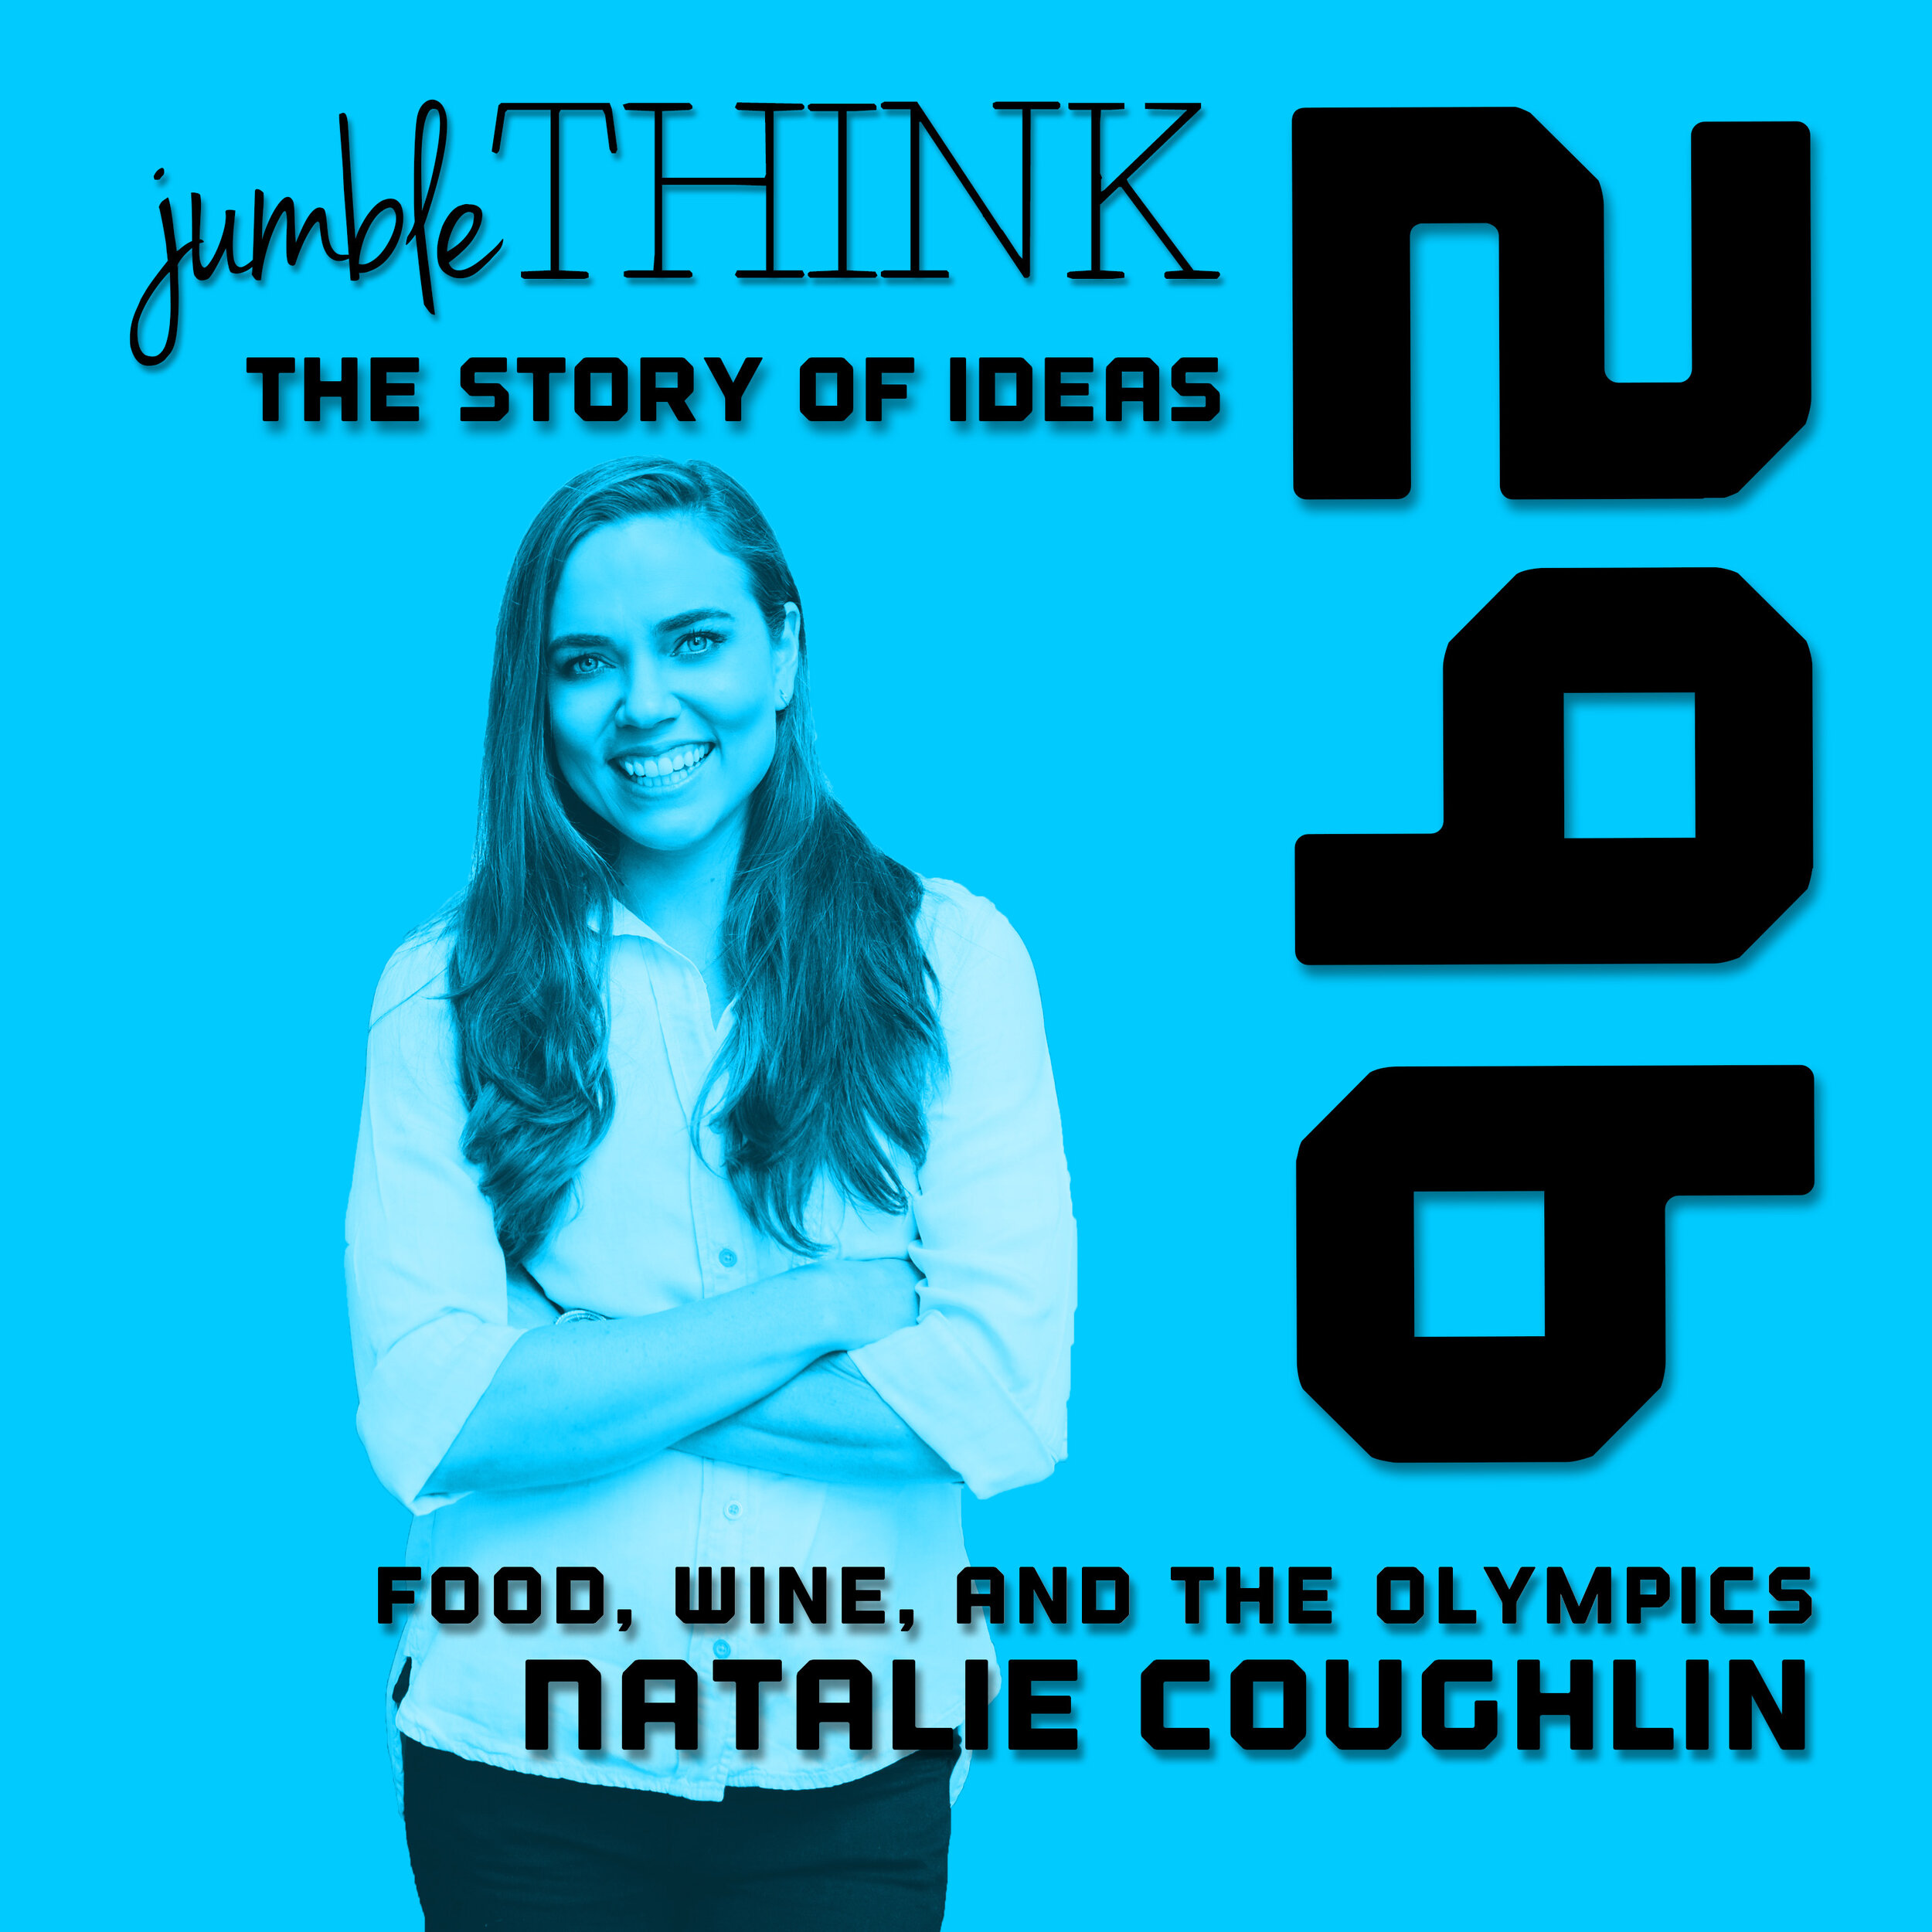 Food, Wine, and the Olympics